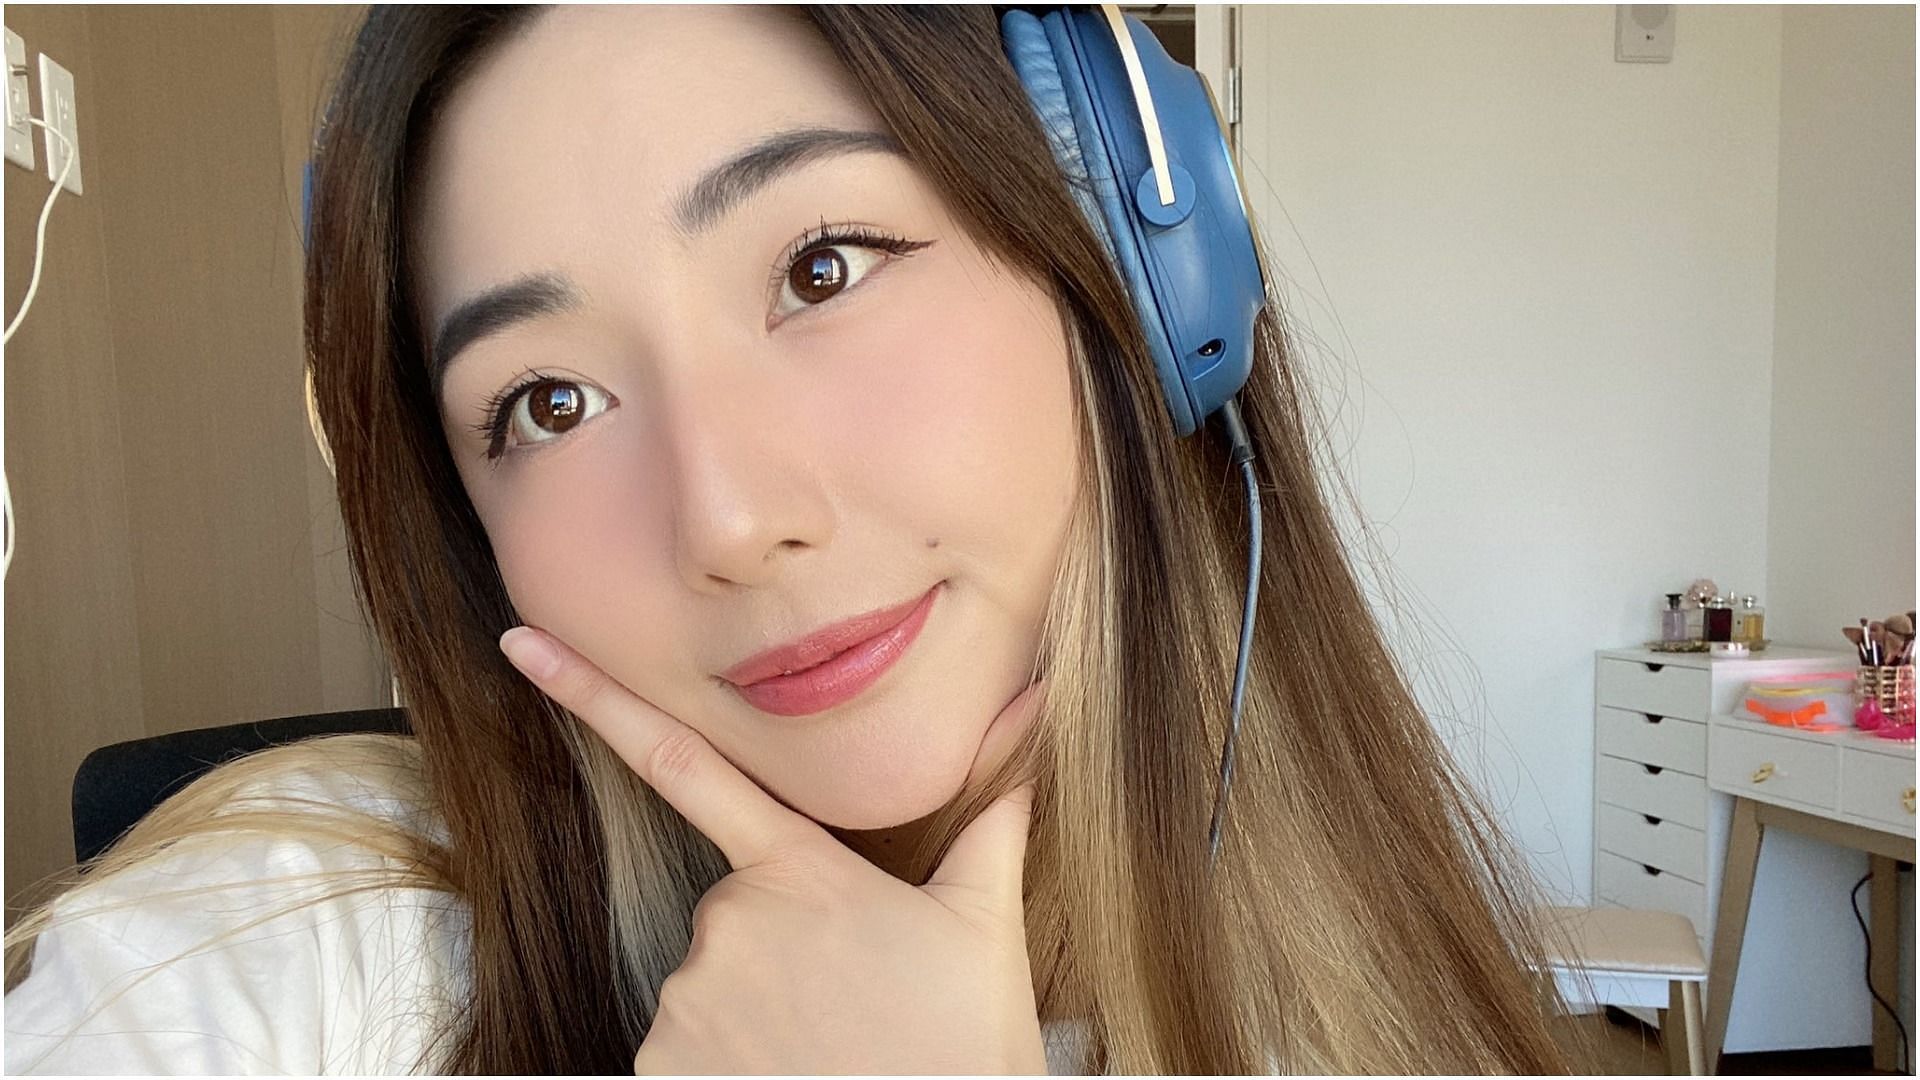 xChocobars lost her phone at EDC, explaining her absence from social media over the weekend (Image via xChocobars/Twitter)